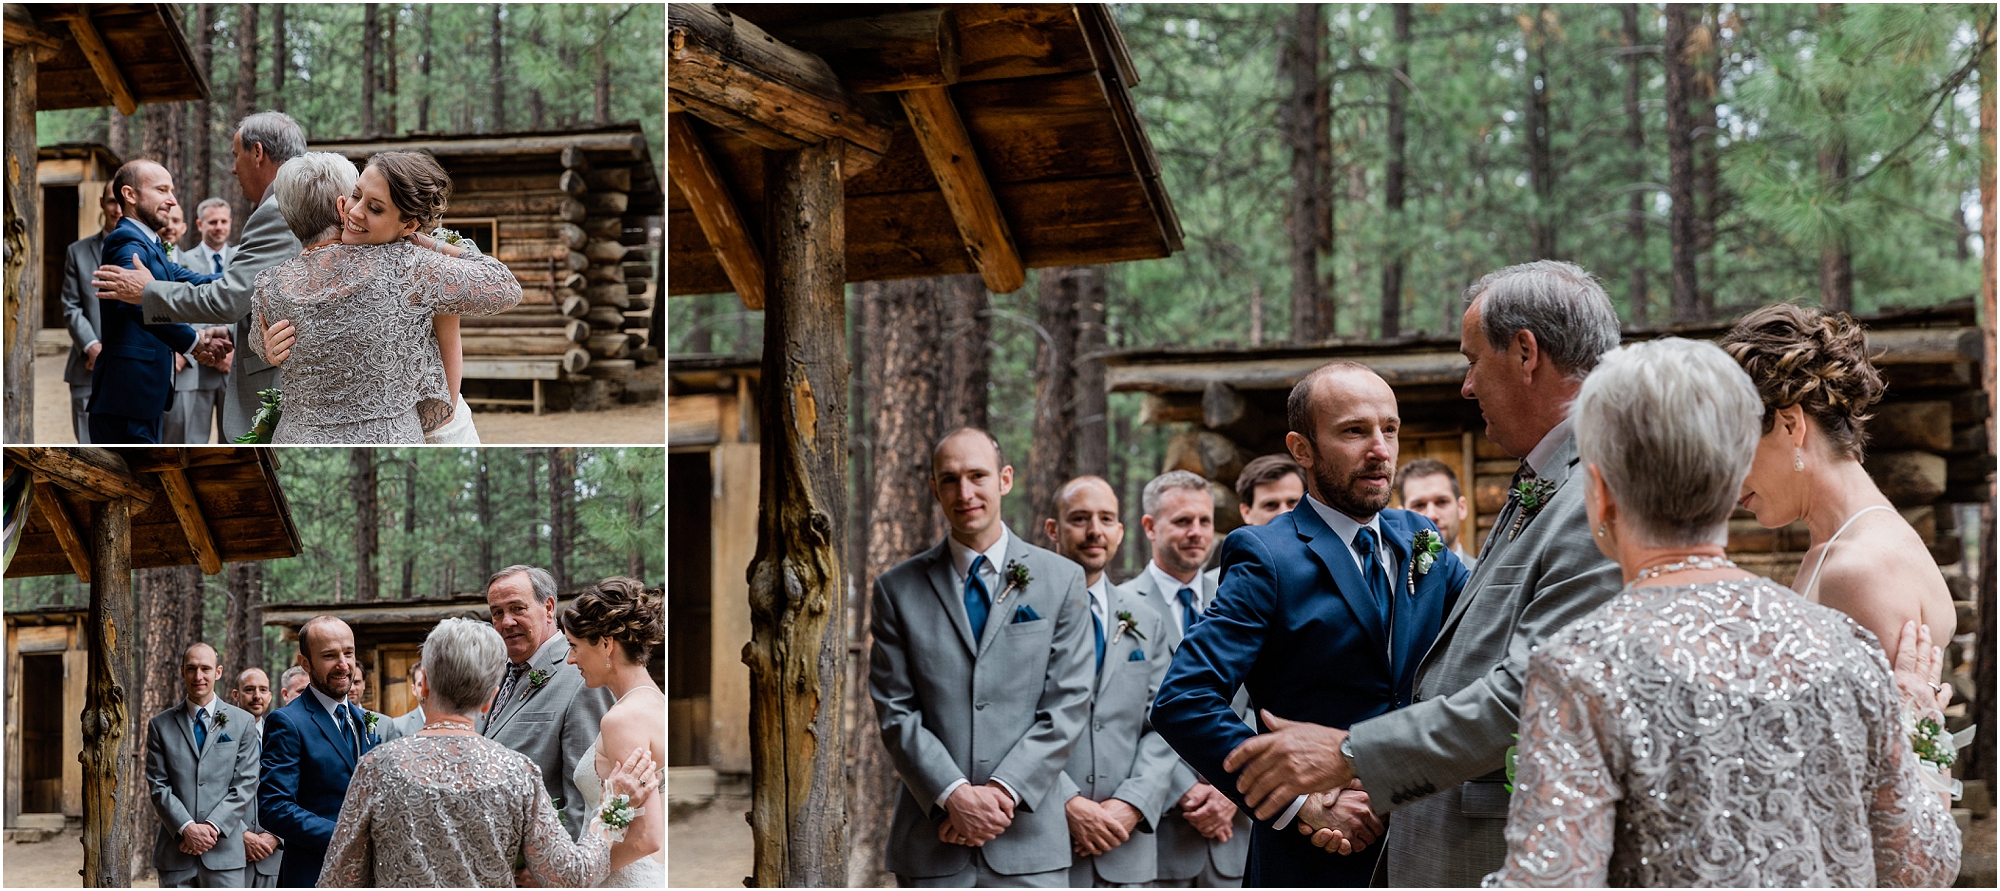 The bride hugs her parents and the groom shakes her father's hand, as he gets ready to marry his beautiful bride at this High Desert Museum homestead wedding in Bend, OR. | Erica Swantek Photography